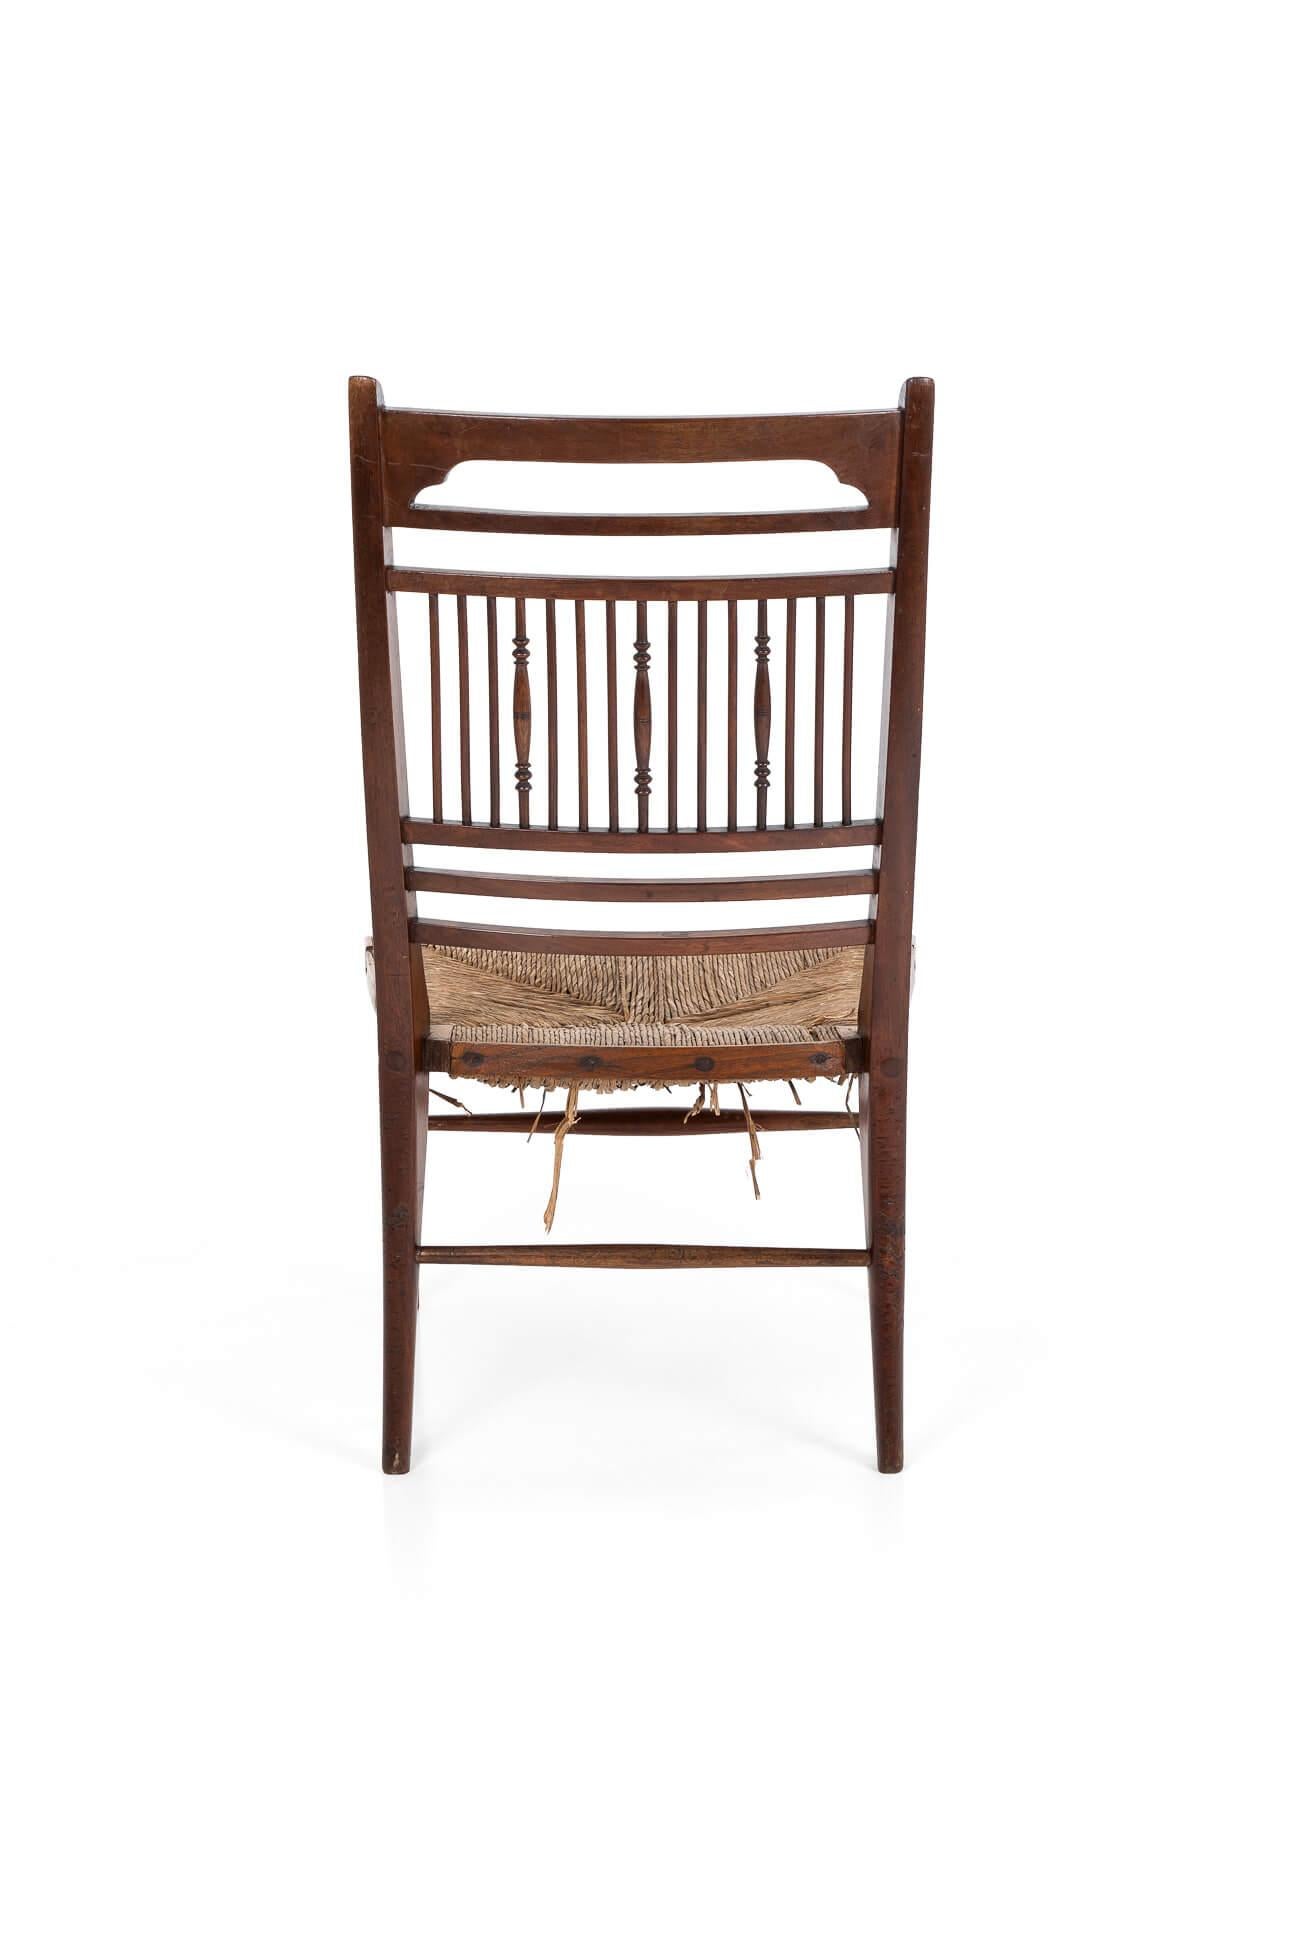 British Aesthetic Movement Side Chair in Walnut by E.W. Godwin, circa 1885 For Sale